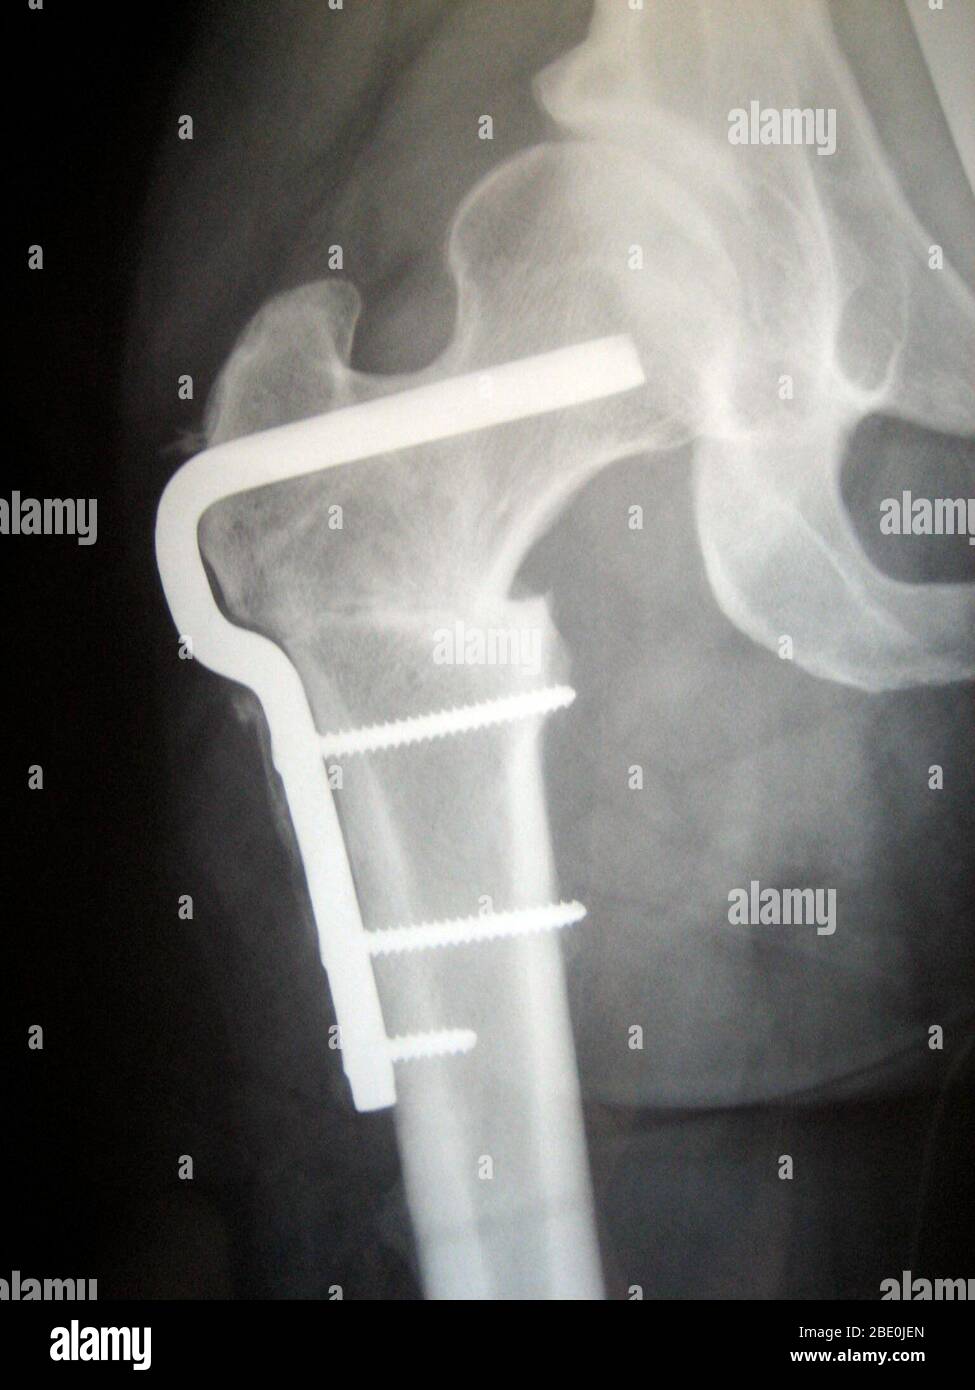 X-ray of femoral osteotomy hardware to correct femoral rotation caused by hip dysplasia. This x-ray shows the right hip in a female patient in her early thirties. Stock Photo